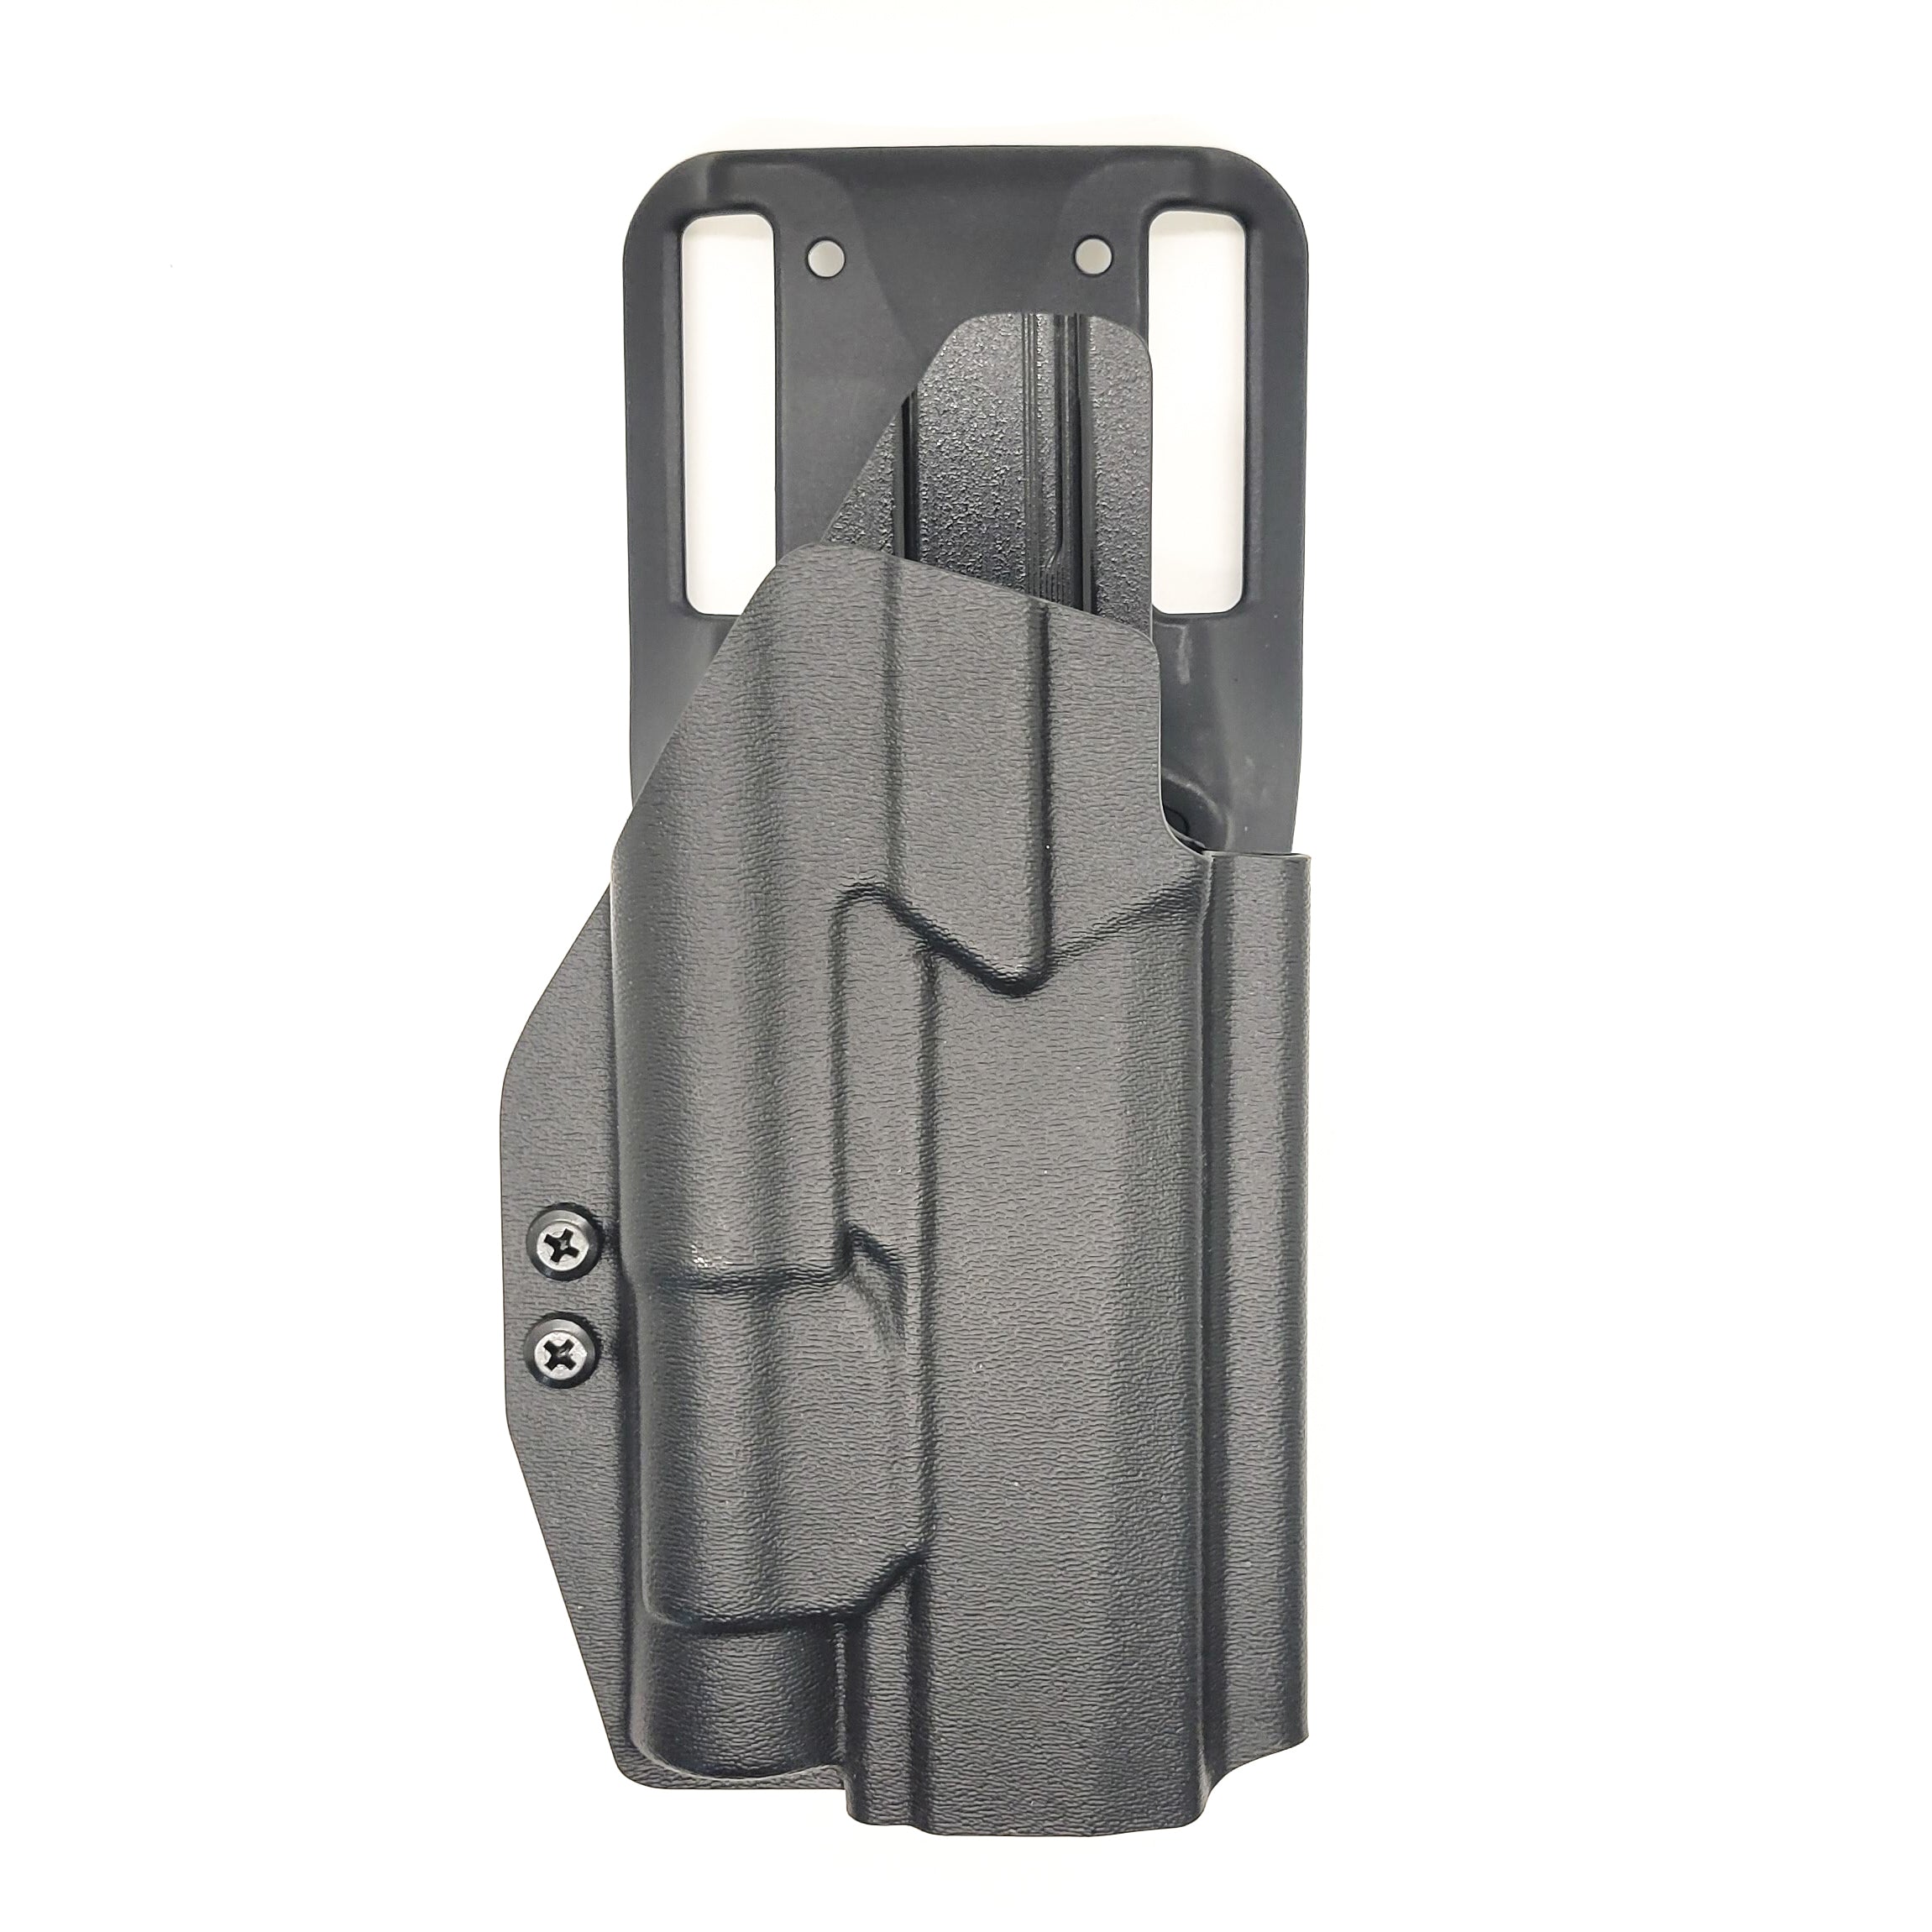 Outside Waistband Holster designed to fit the Full Size and Carry P320 series with Streamlight TLR-1 and TLR-1HL weapon mounted light and GoGuns USA Gas Pedal Holster will accommodate the M17, M18, and X-Five models as well as the Carry and Compact using our competition belt mounting options. Made in USA.